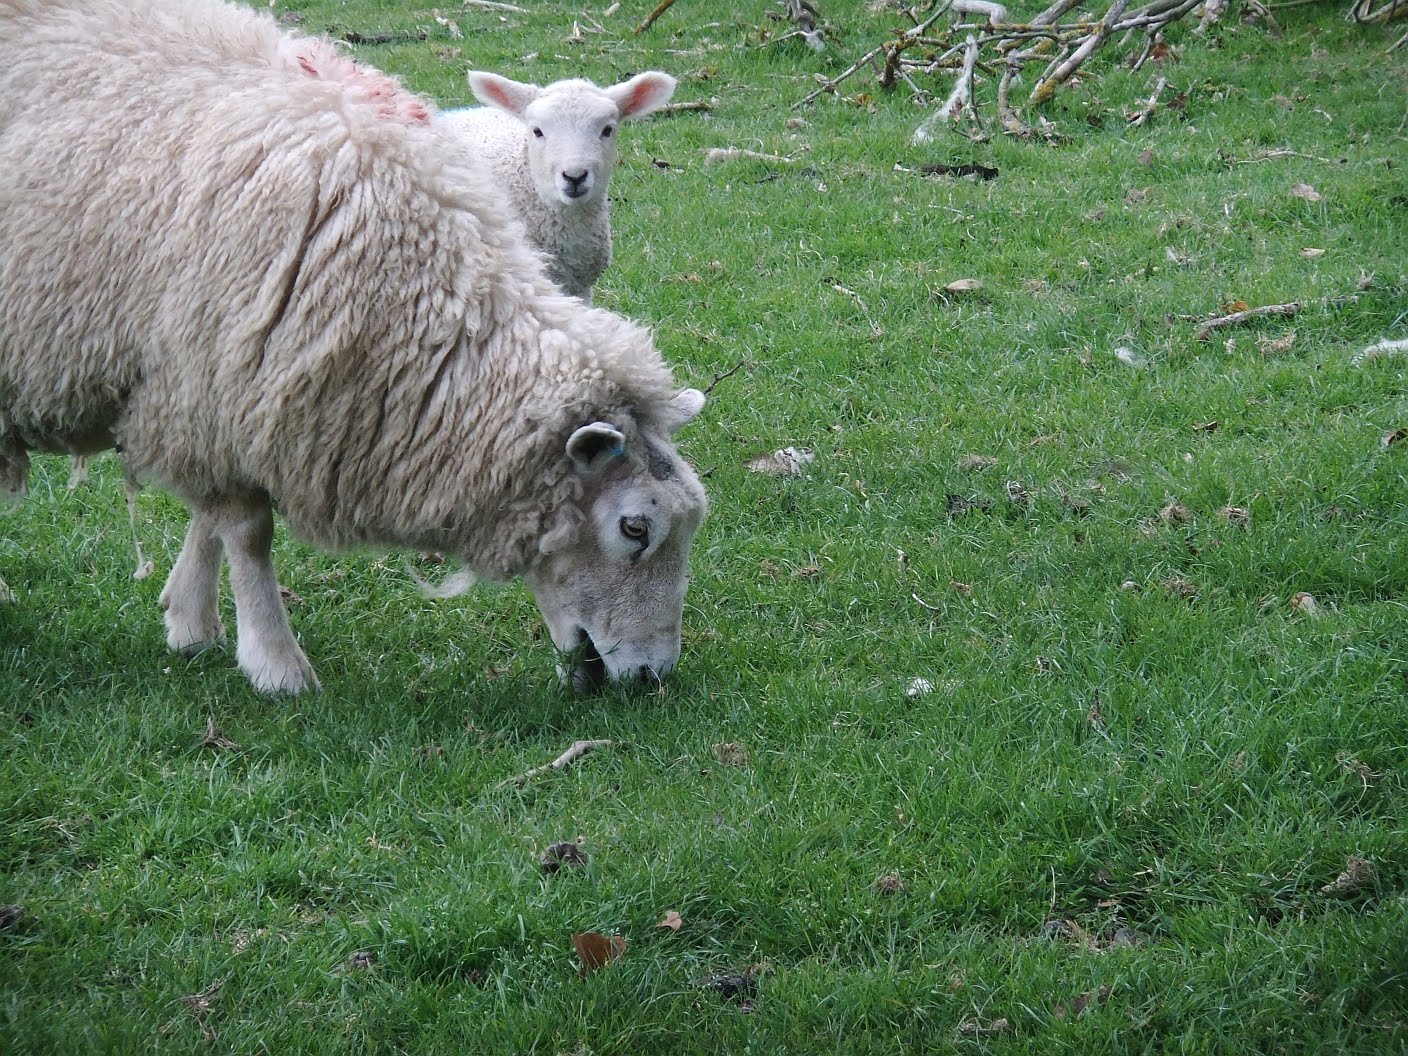 images of lambs